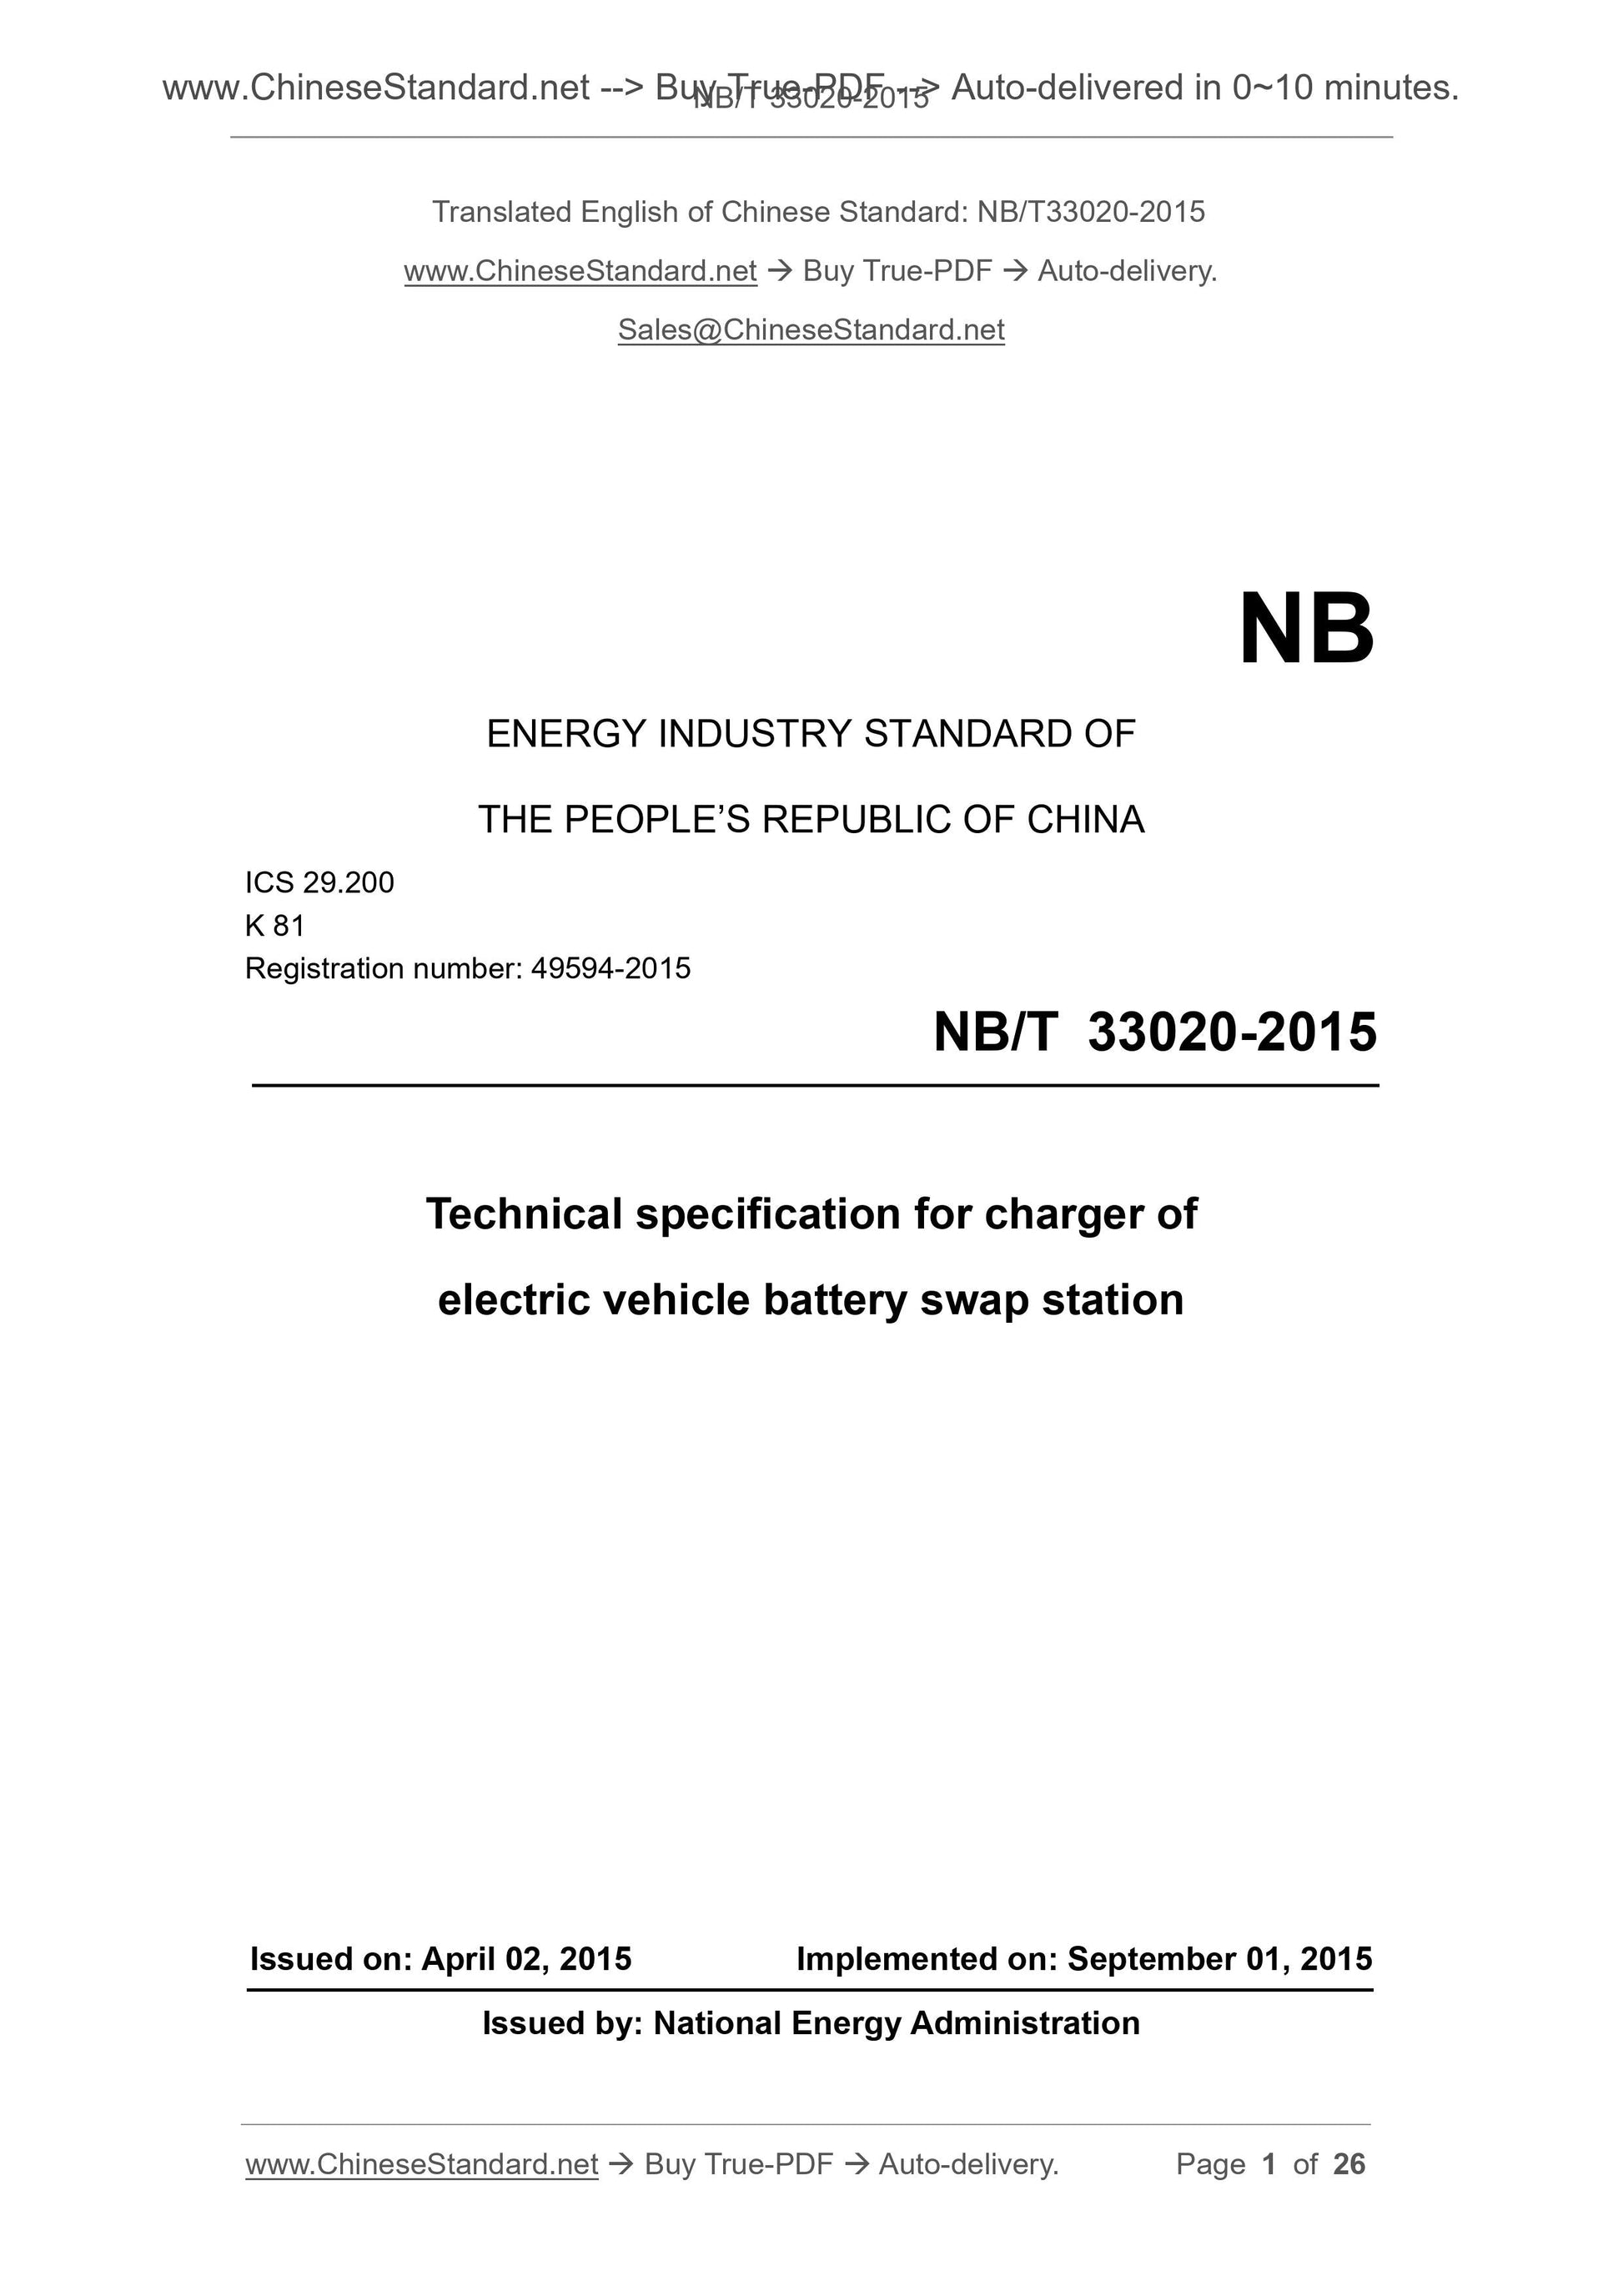 NB/T 33020-2015 Page 1